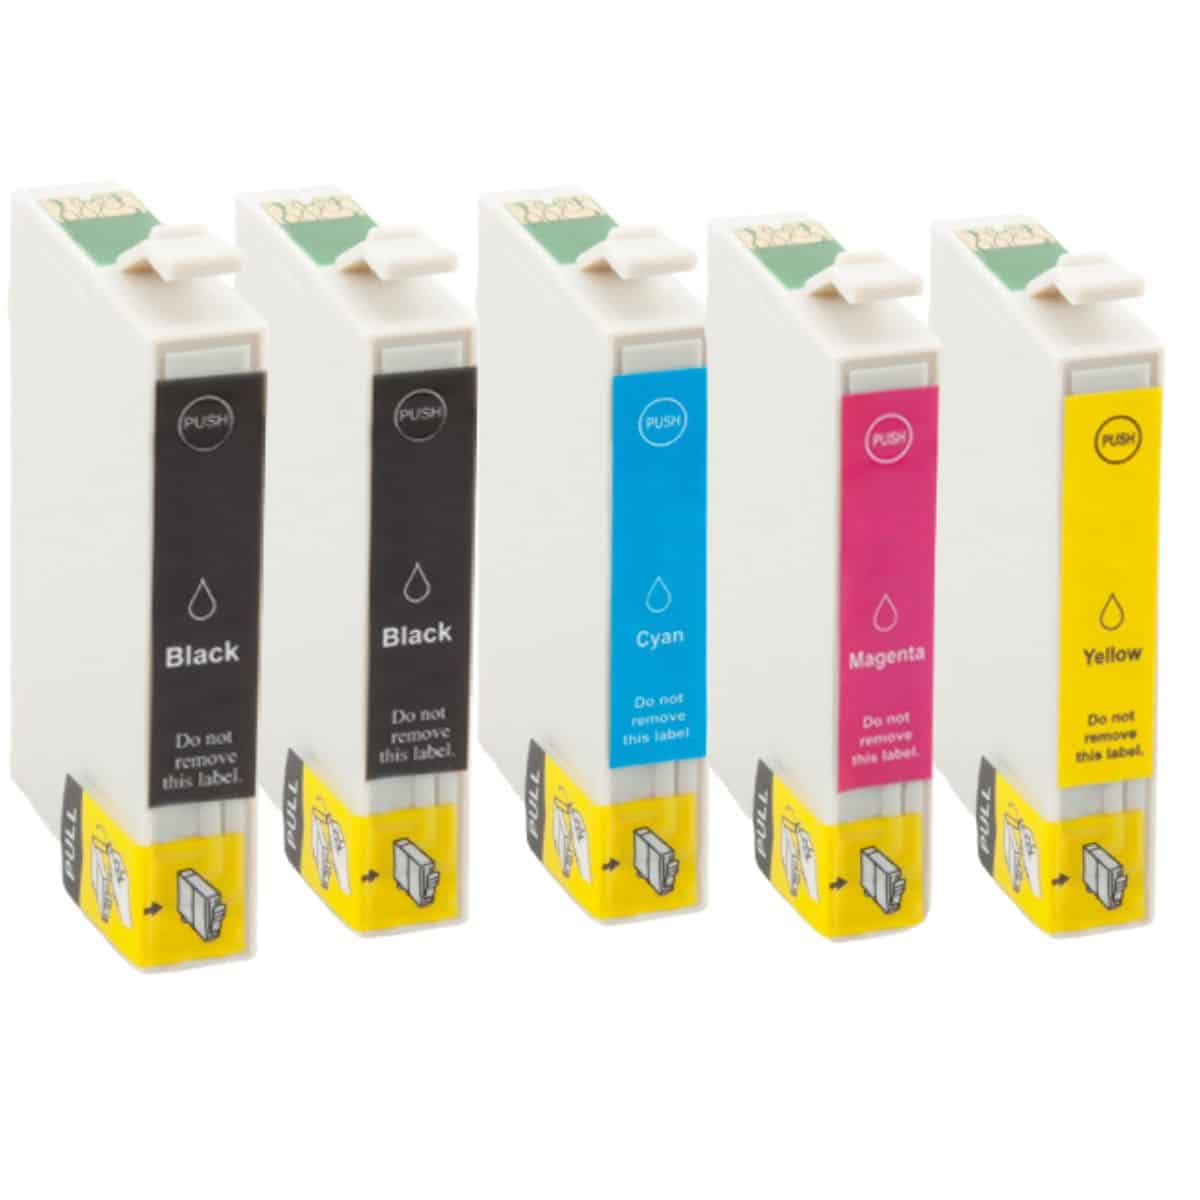 Tinnee 10 Pack T1295 Cartouche d'encre, Remplacer Epson T1291